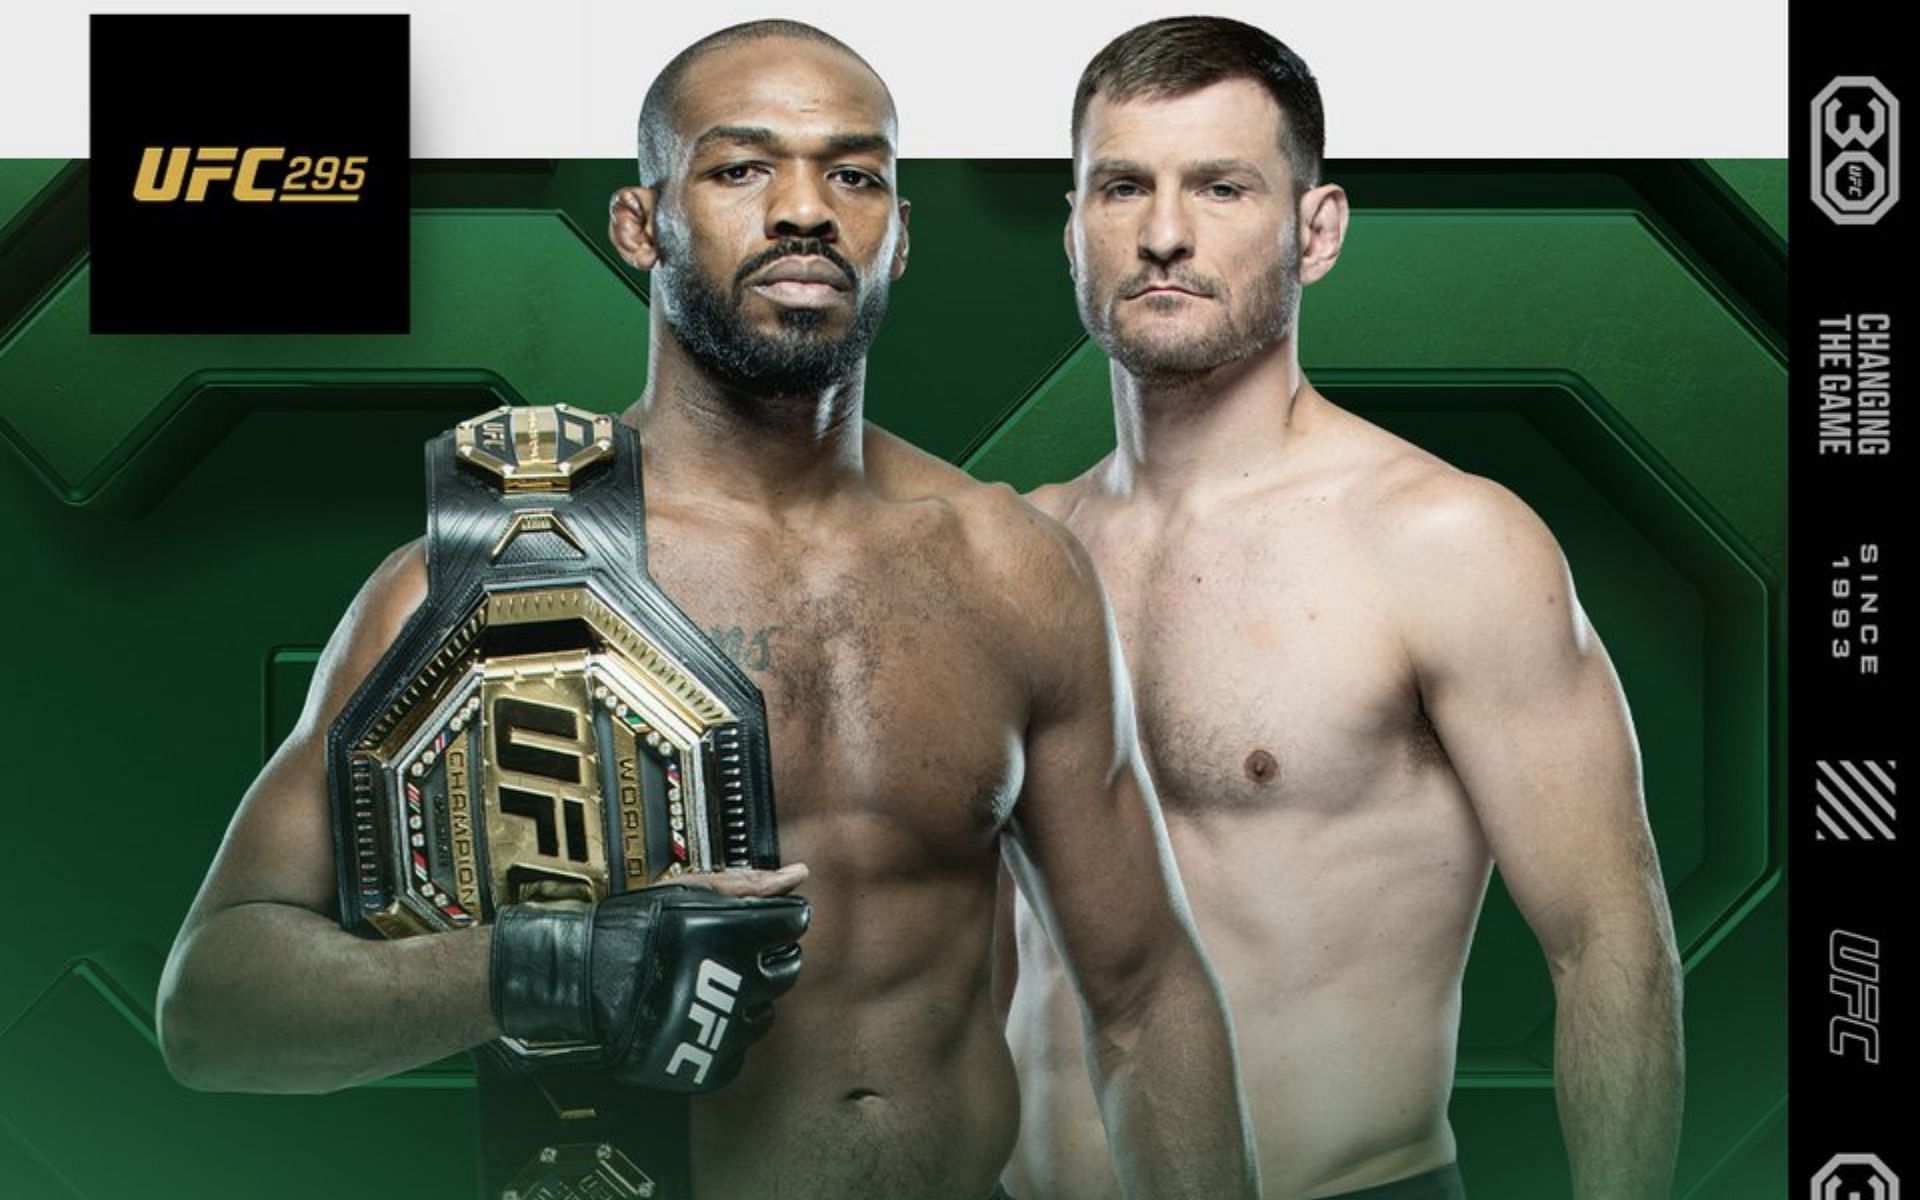 Jon Jones Vs Stipe Miocic Breaking Top Ranked Heavyweight Will Reportedly Serve As Backup For